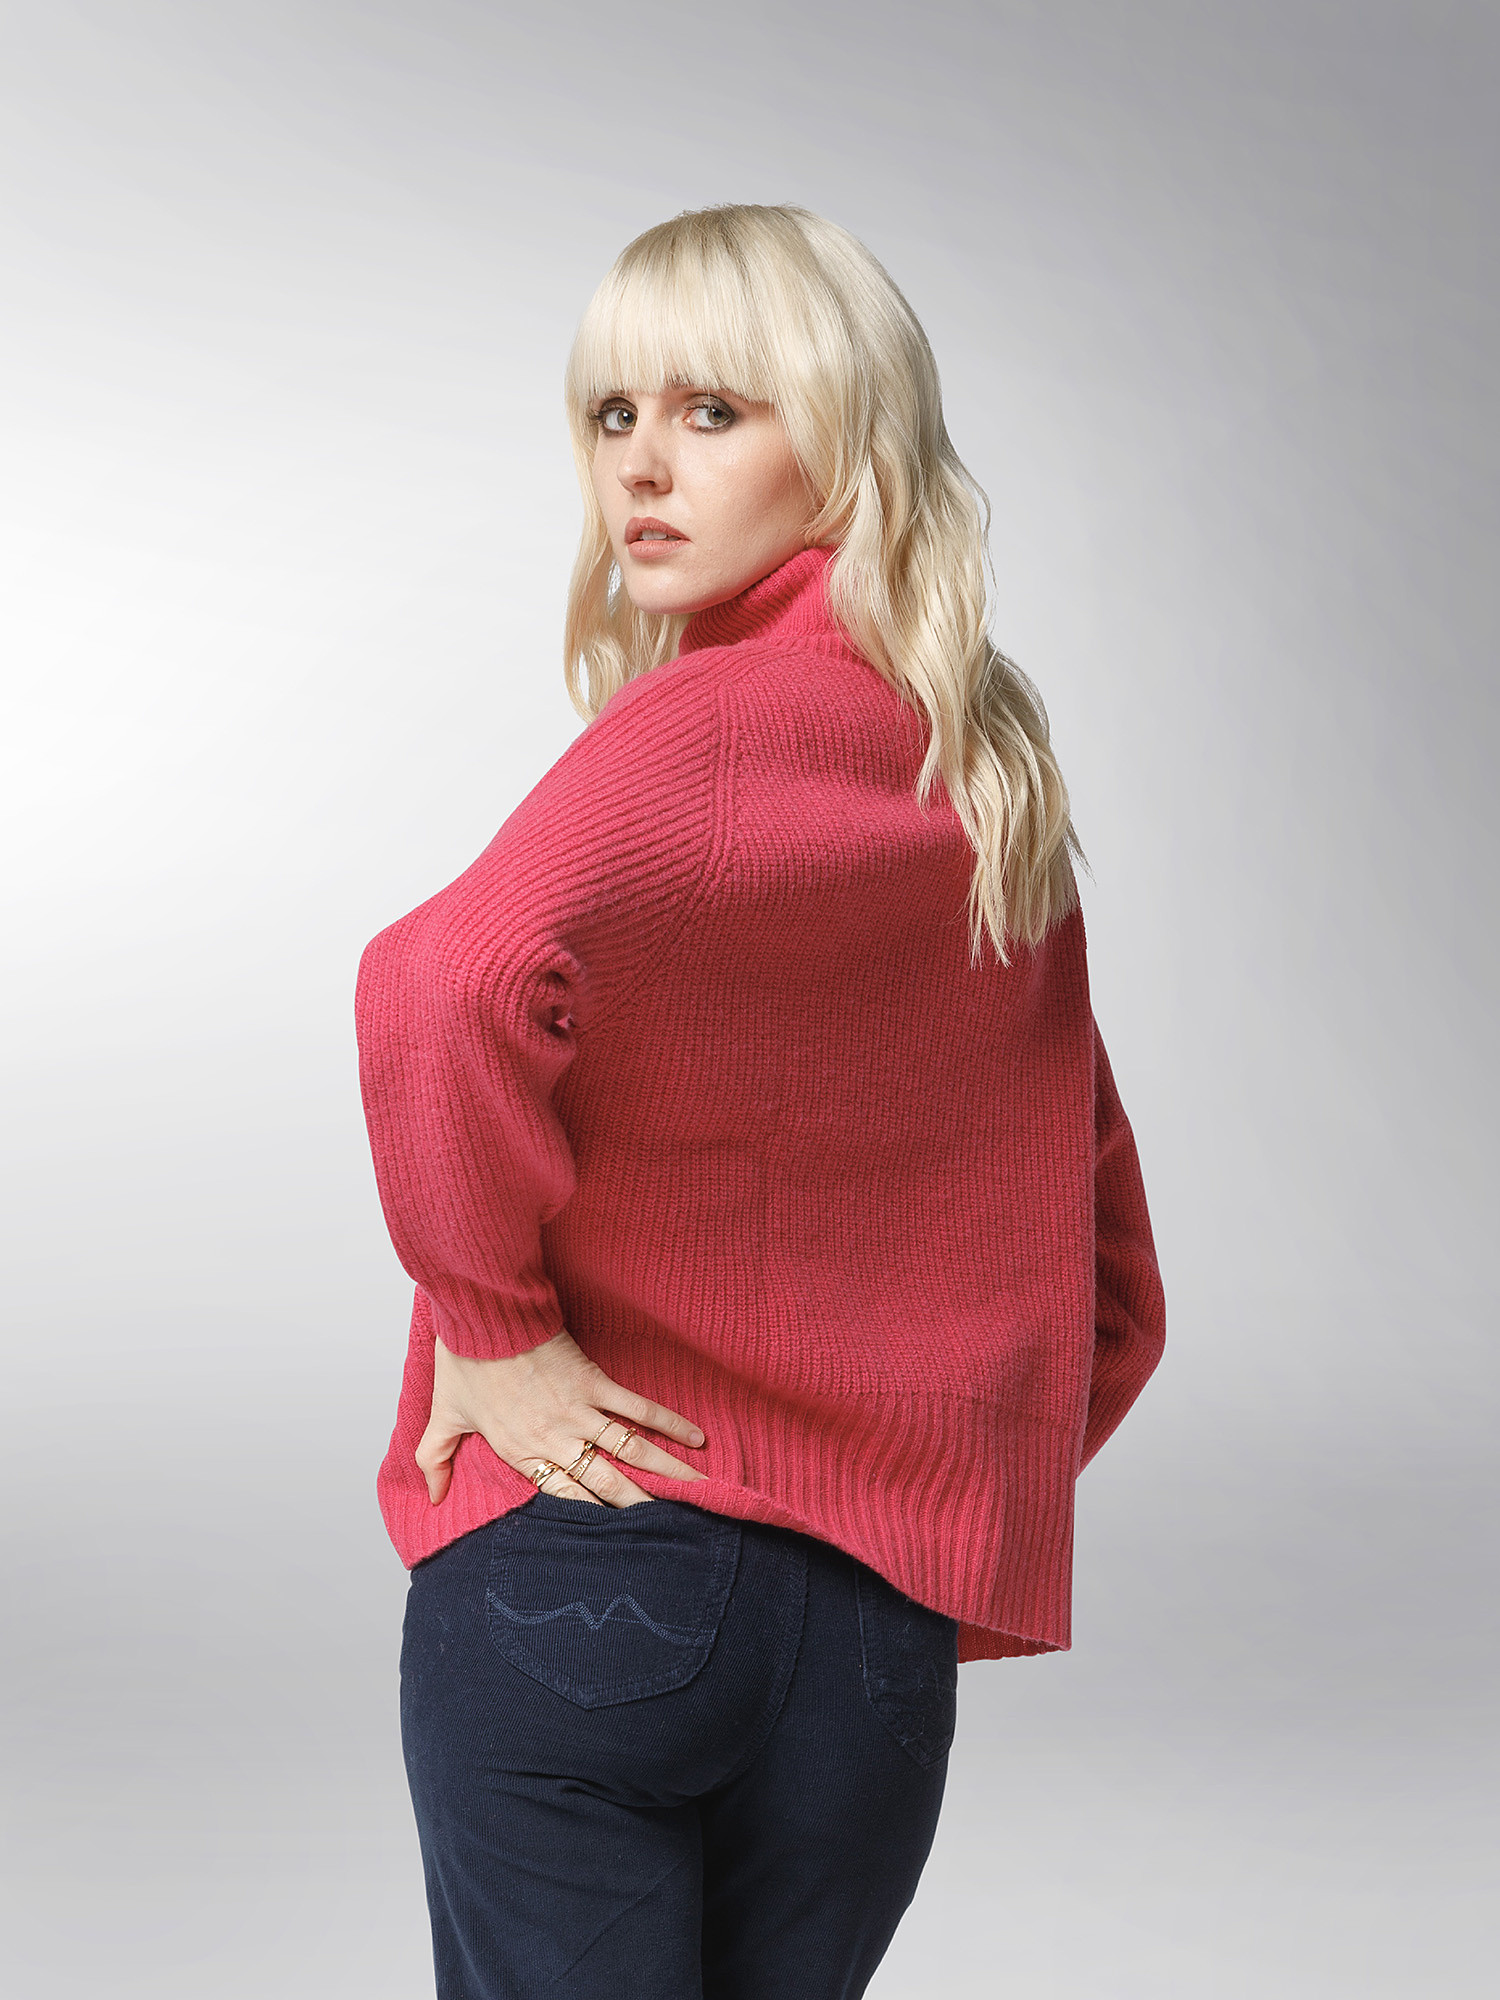 K Collection - Pullover dolcevita in lana cardata, Rosa fuxia, large image number 5